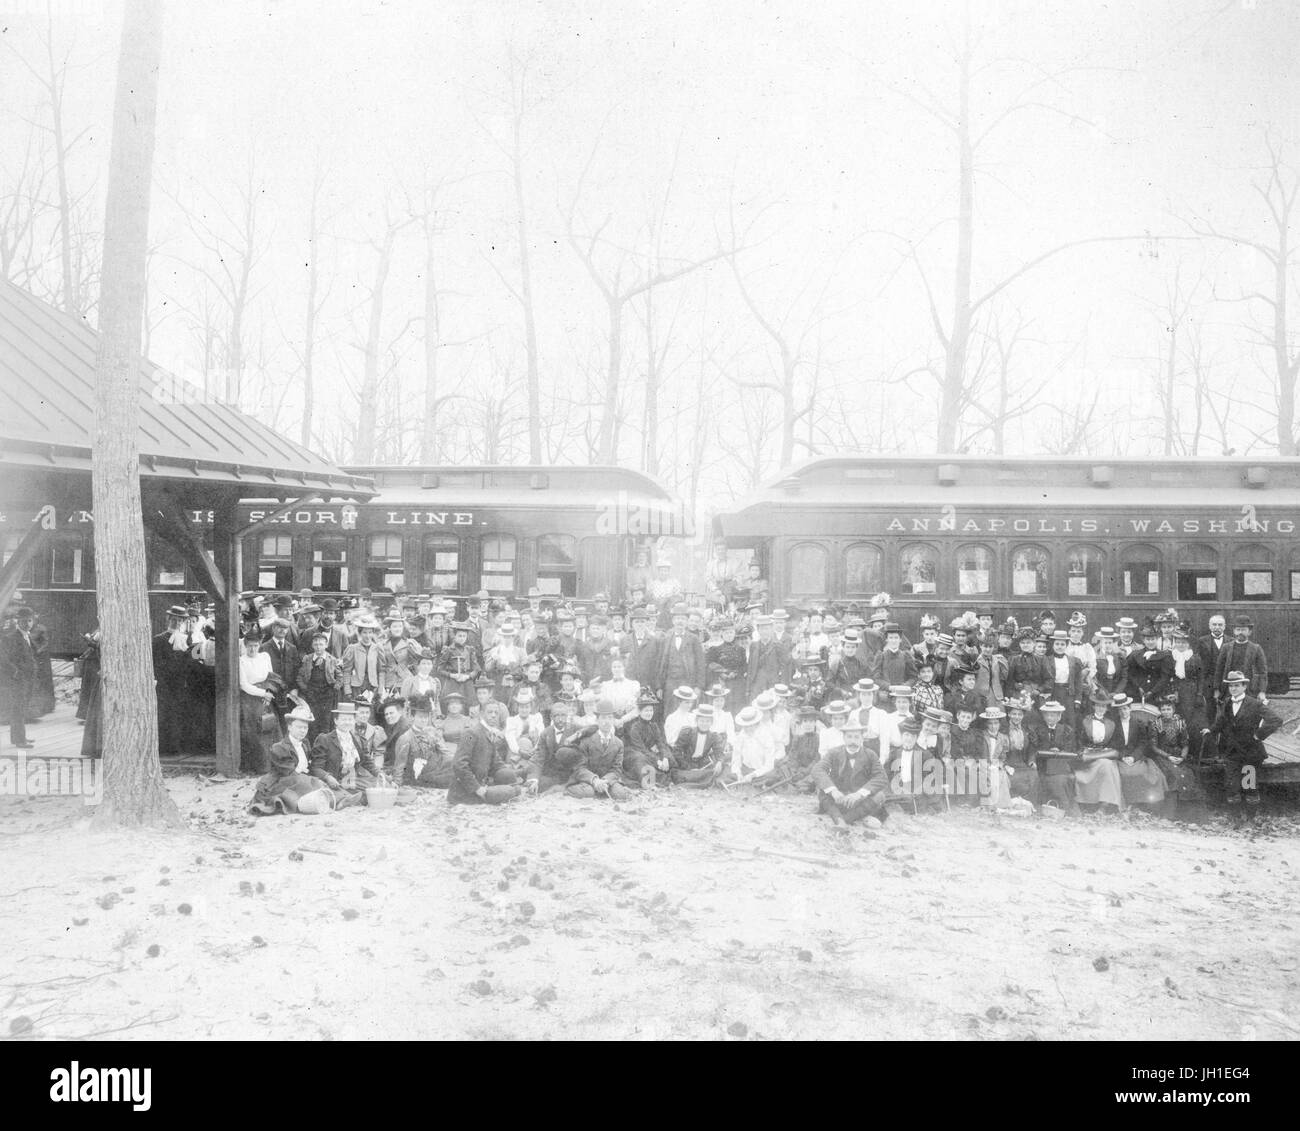 Members of the Teachers Scientific Course are gathered in front of train cars on an excursion to Severn River, Maryland, 1899. Stock Photo